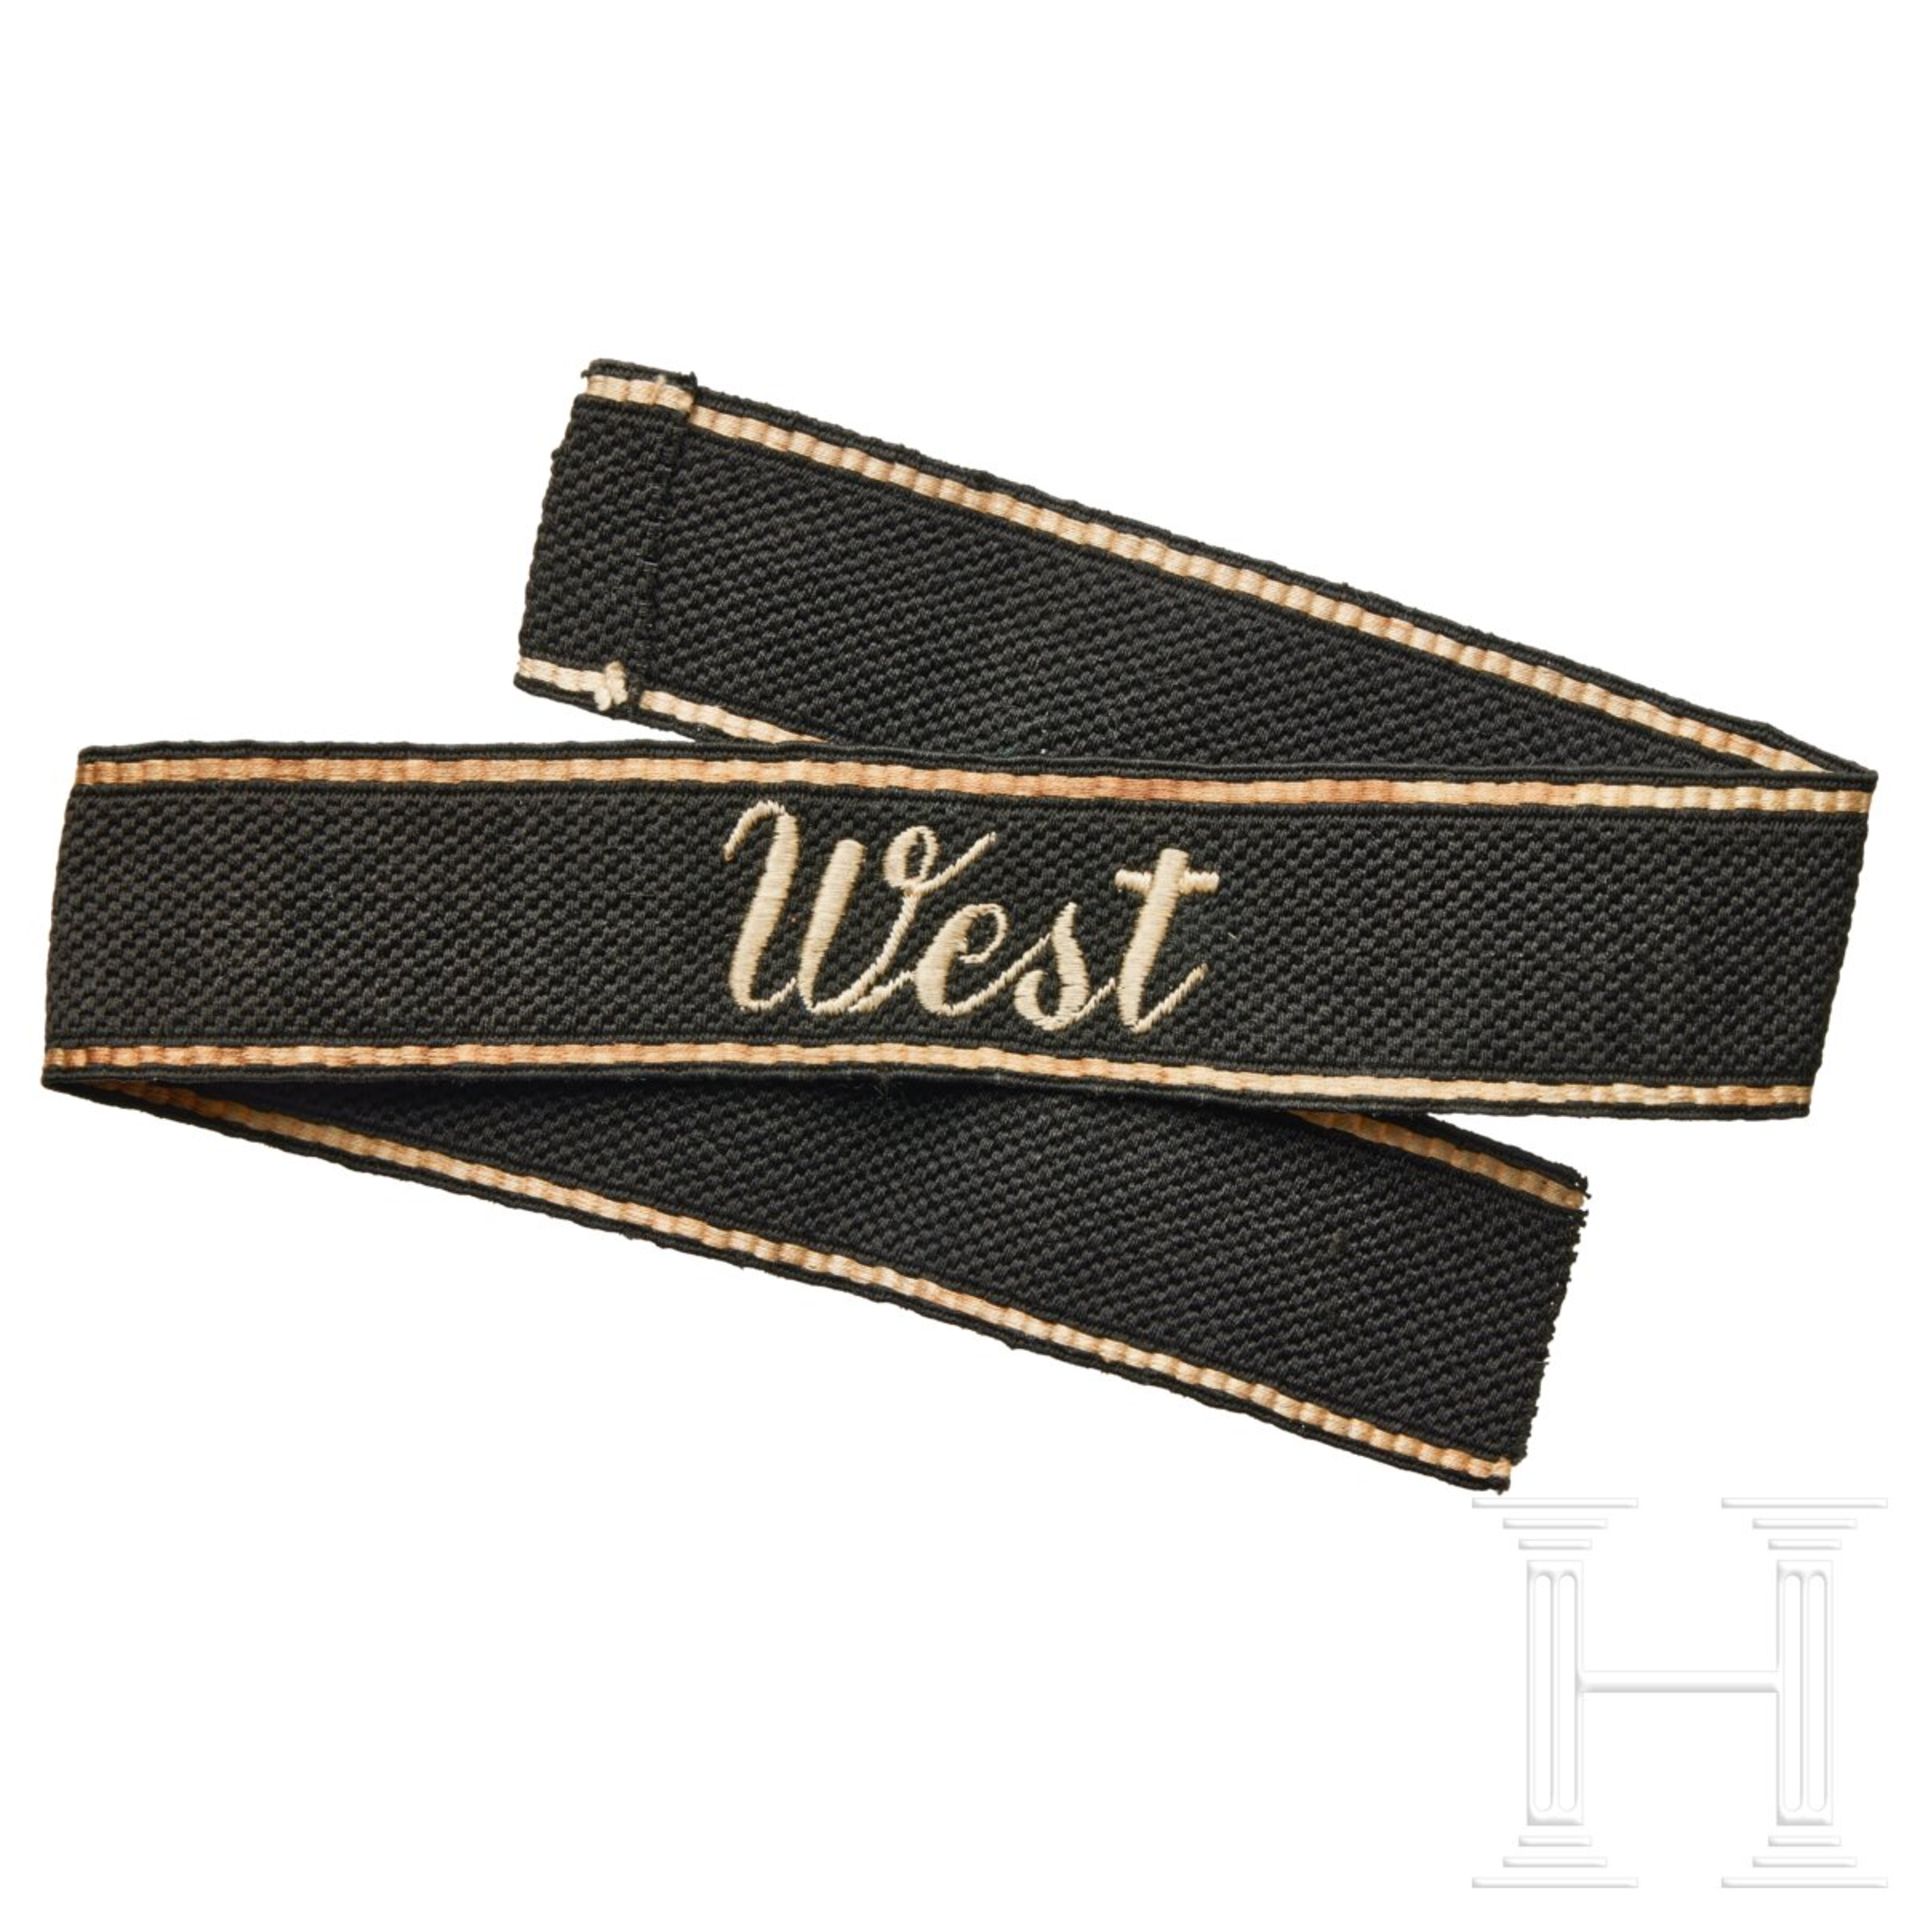 A Cufftitle for SS-District “West”, Enlisted